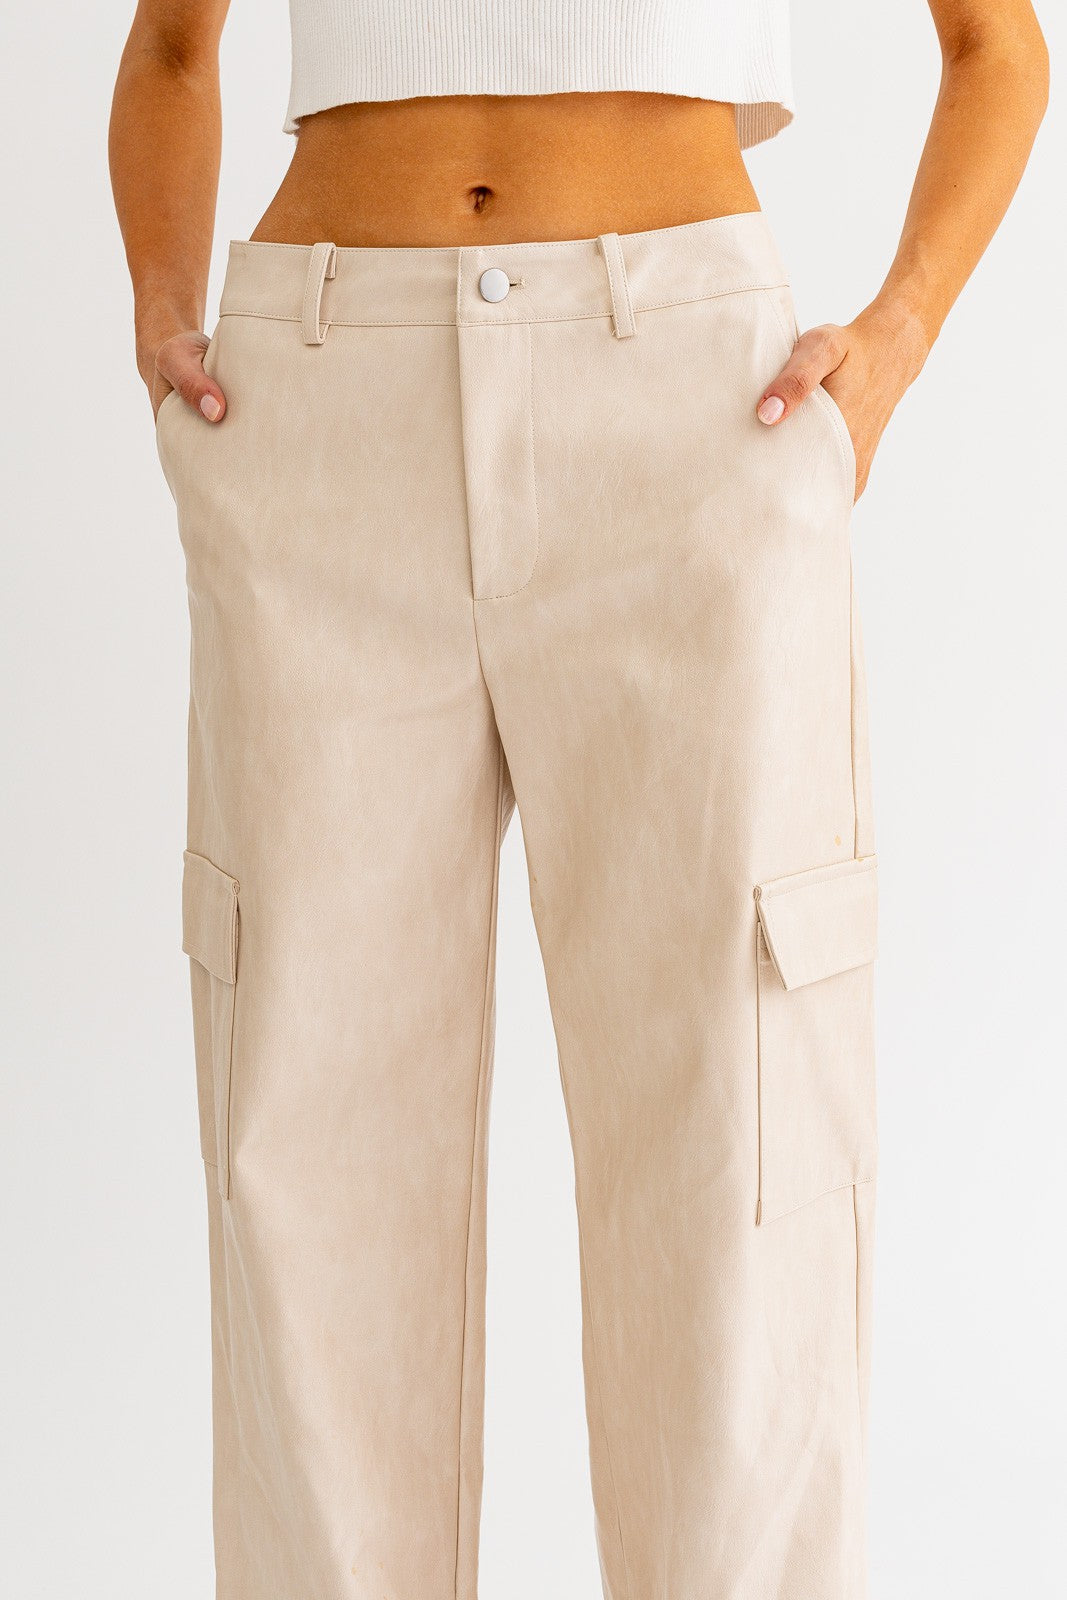 Meeting The Family Vegan Leather Cargo Pants